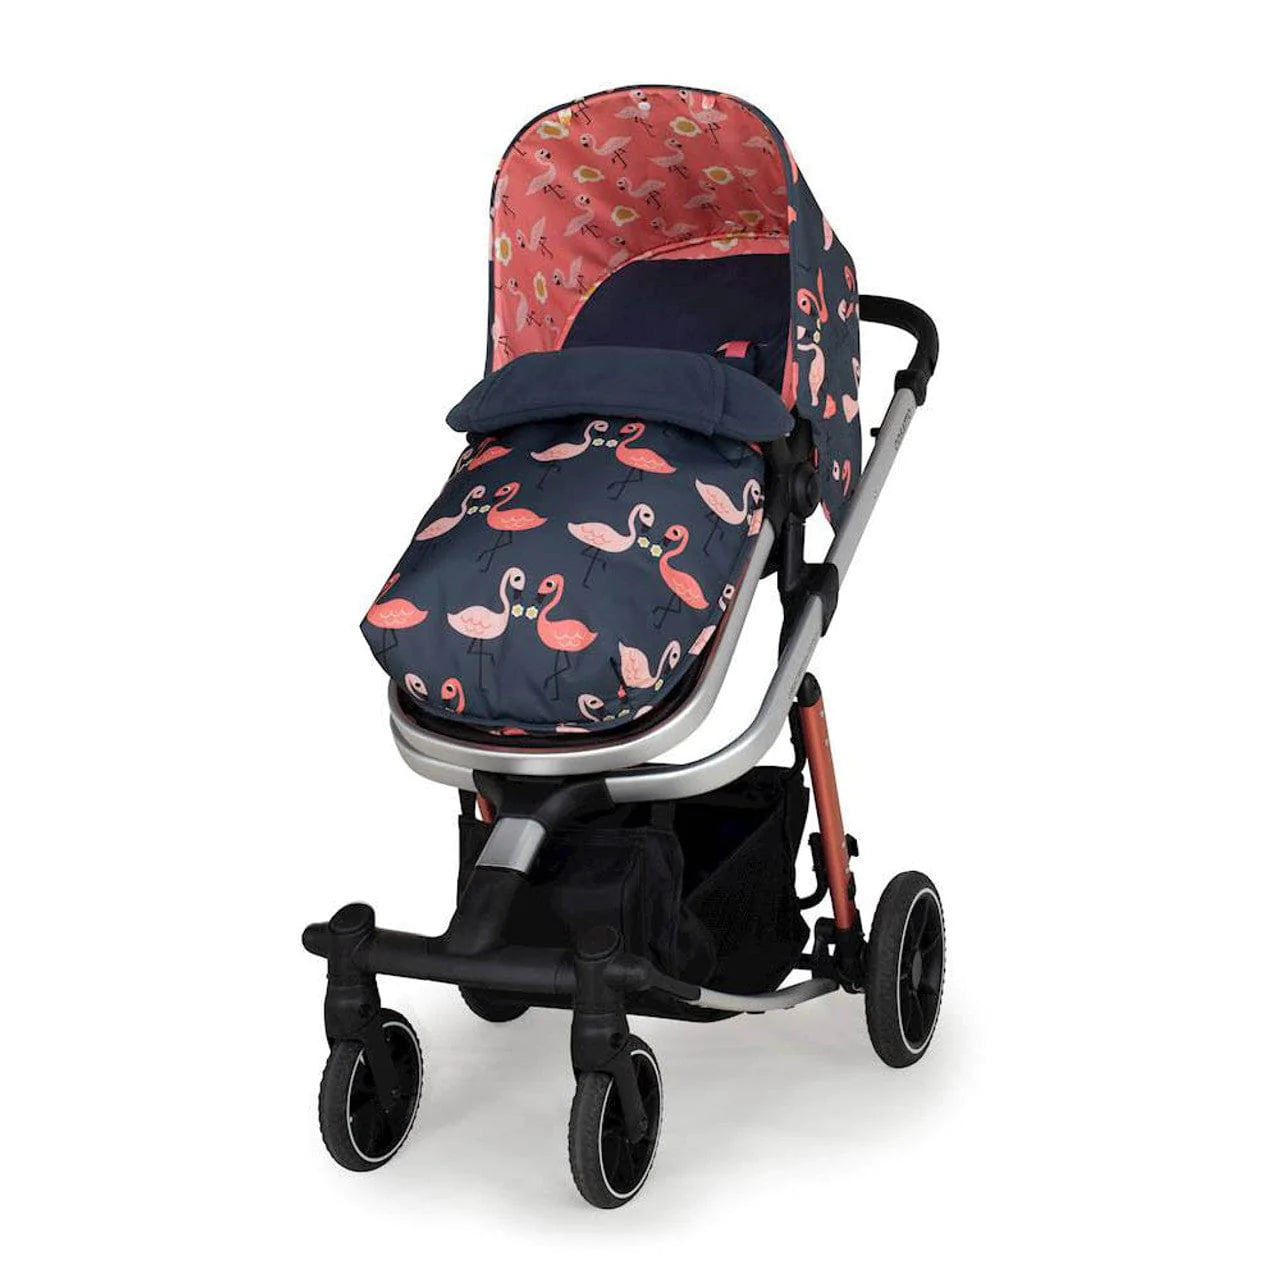 Cosatto Prams & Car Seat Bundles Cosatto Giggle Trail i-Size Everything Bundle - Direct Delivery